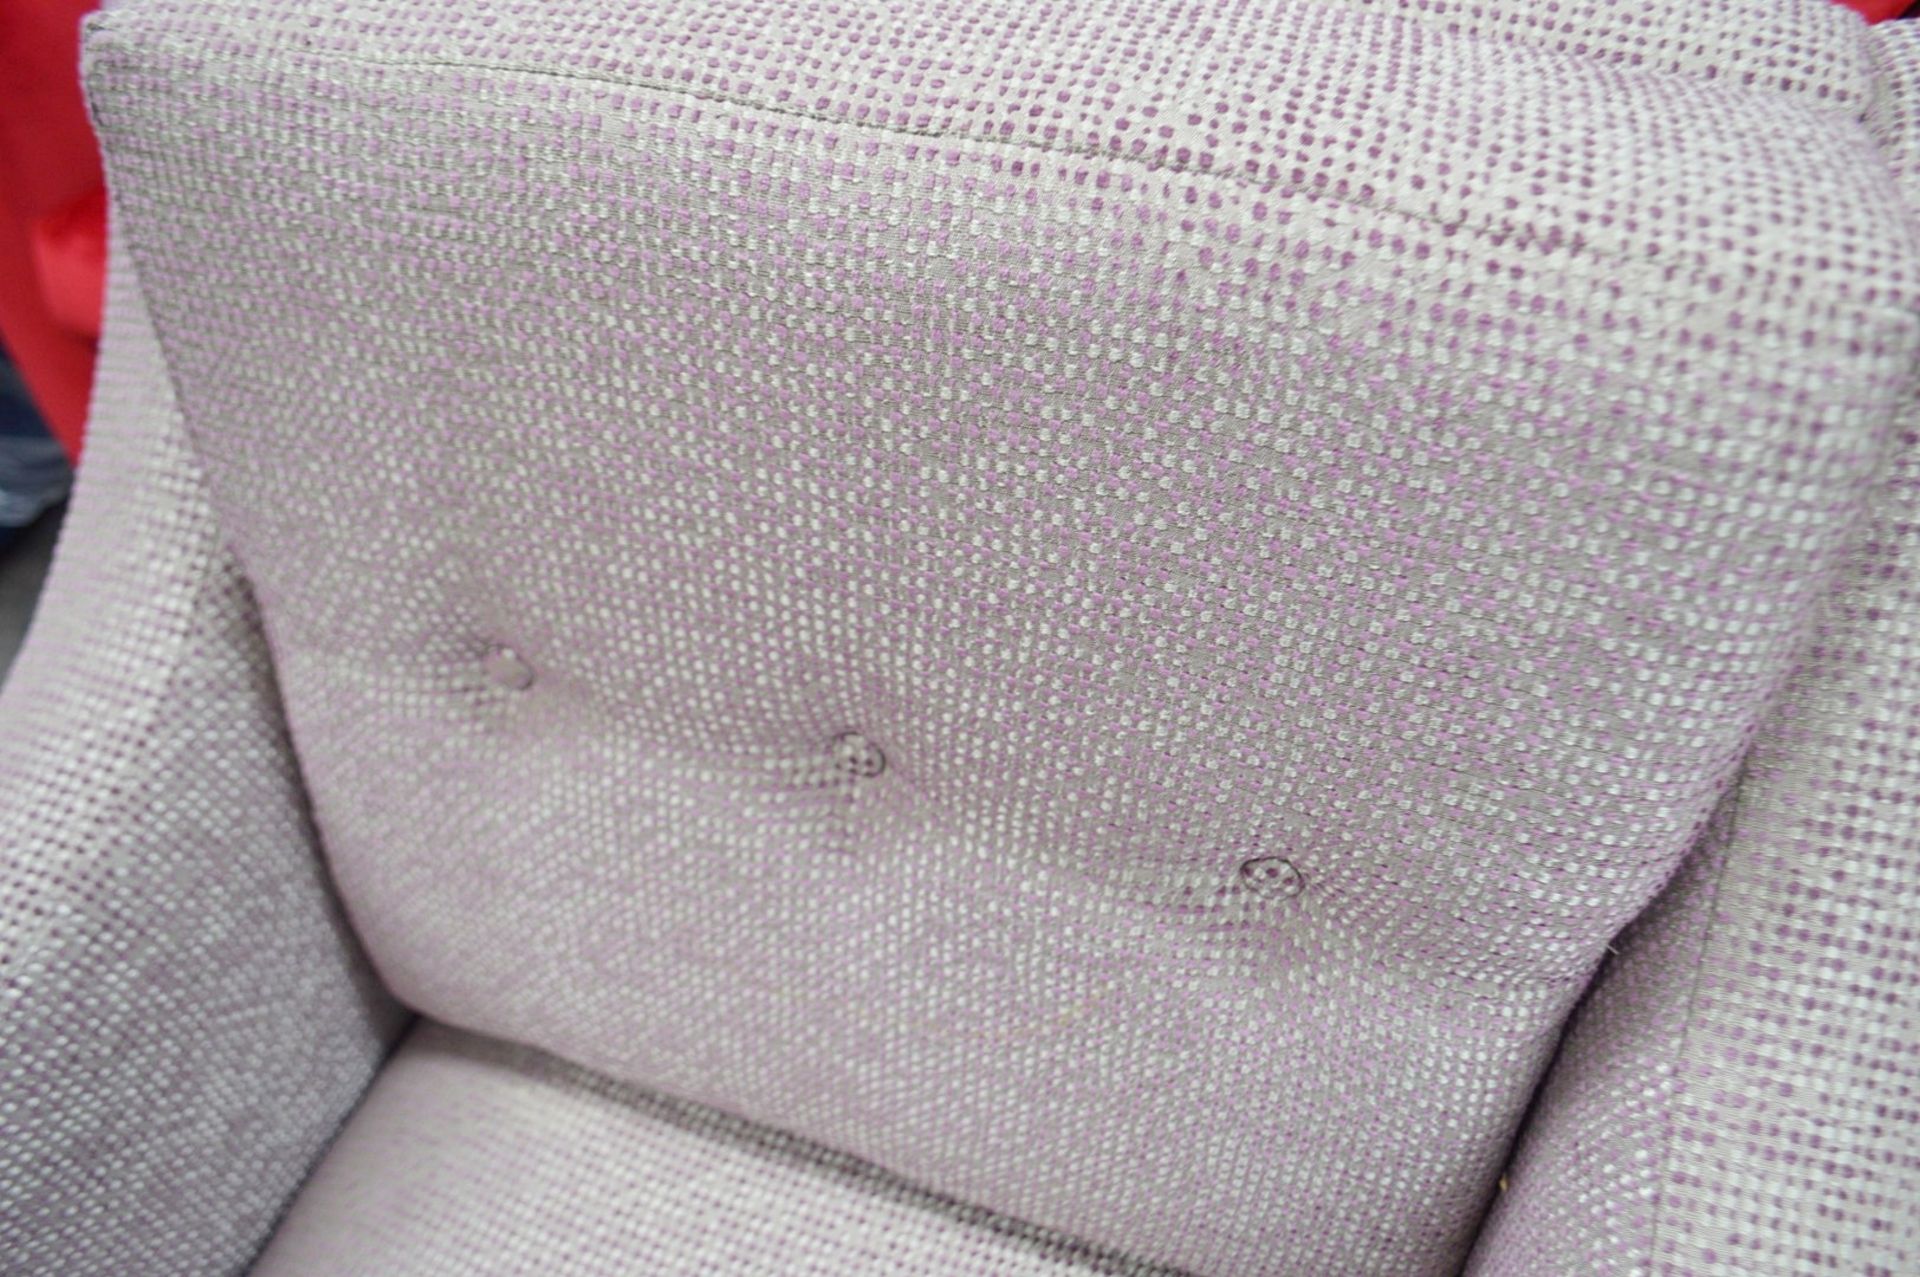 1 x Large Commercial Armchair Upholstered In A Grey & Purple Premium Fabric - Image 6 of 7